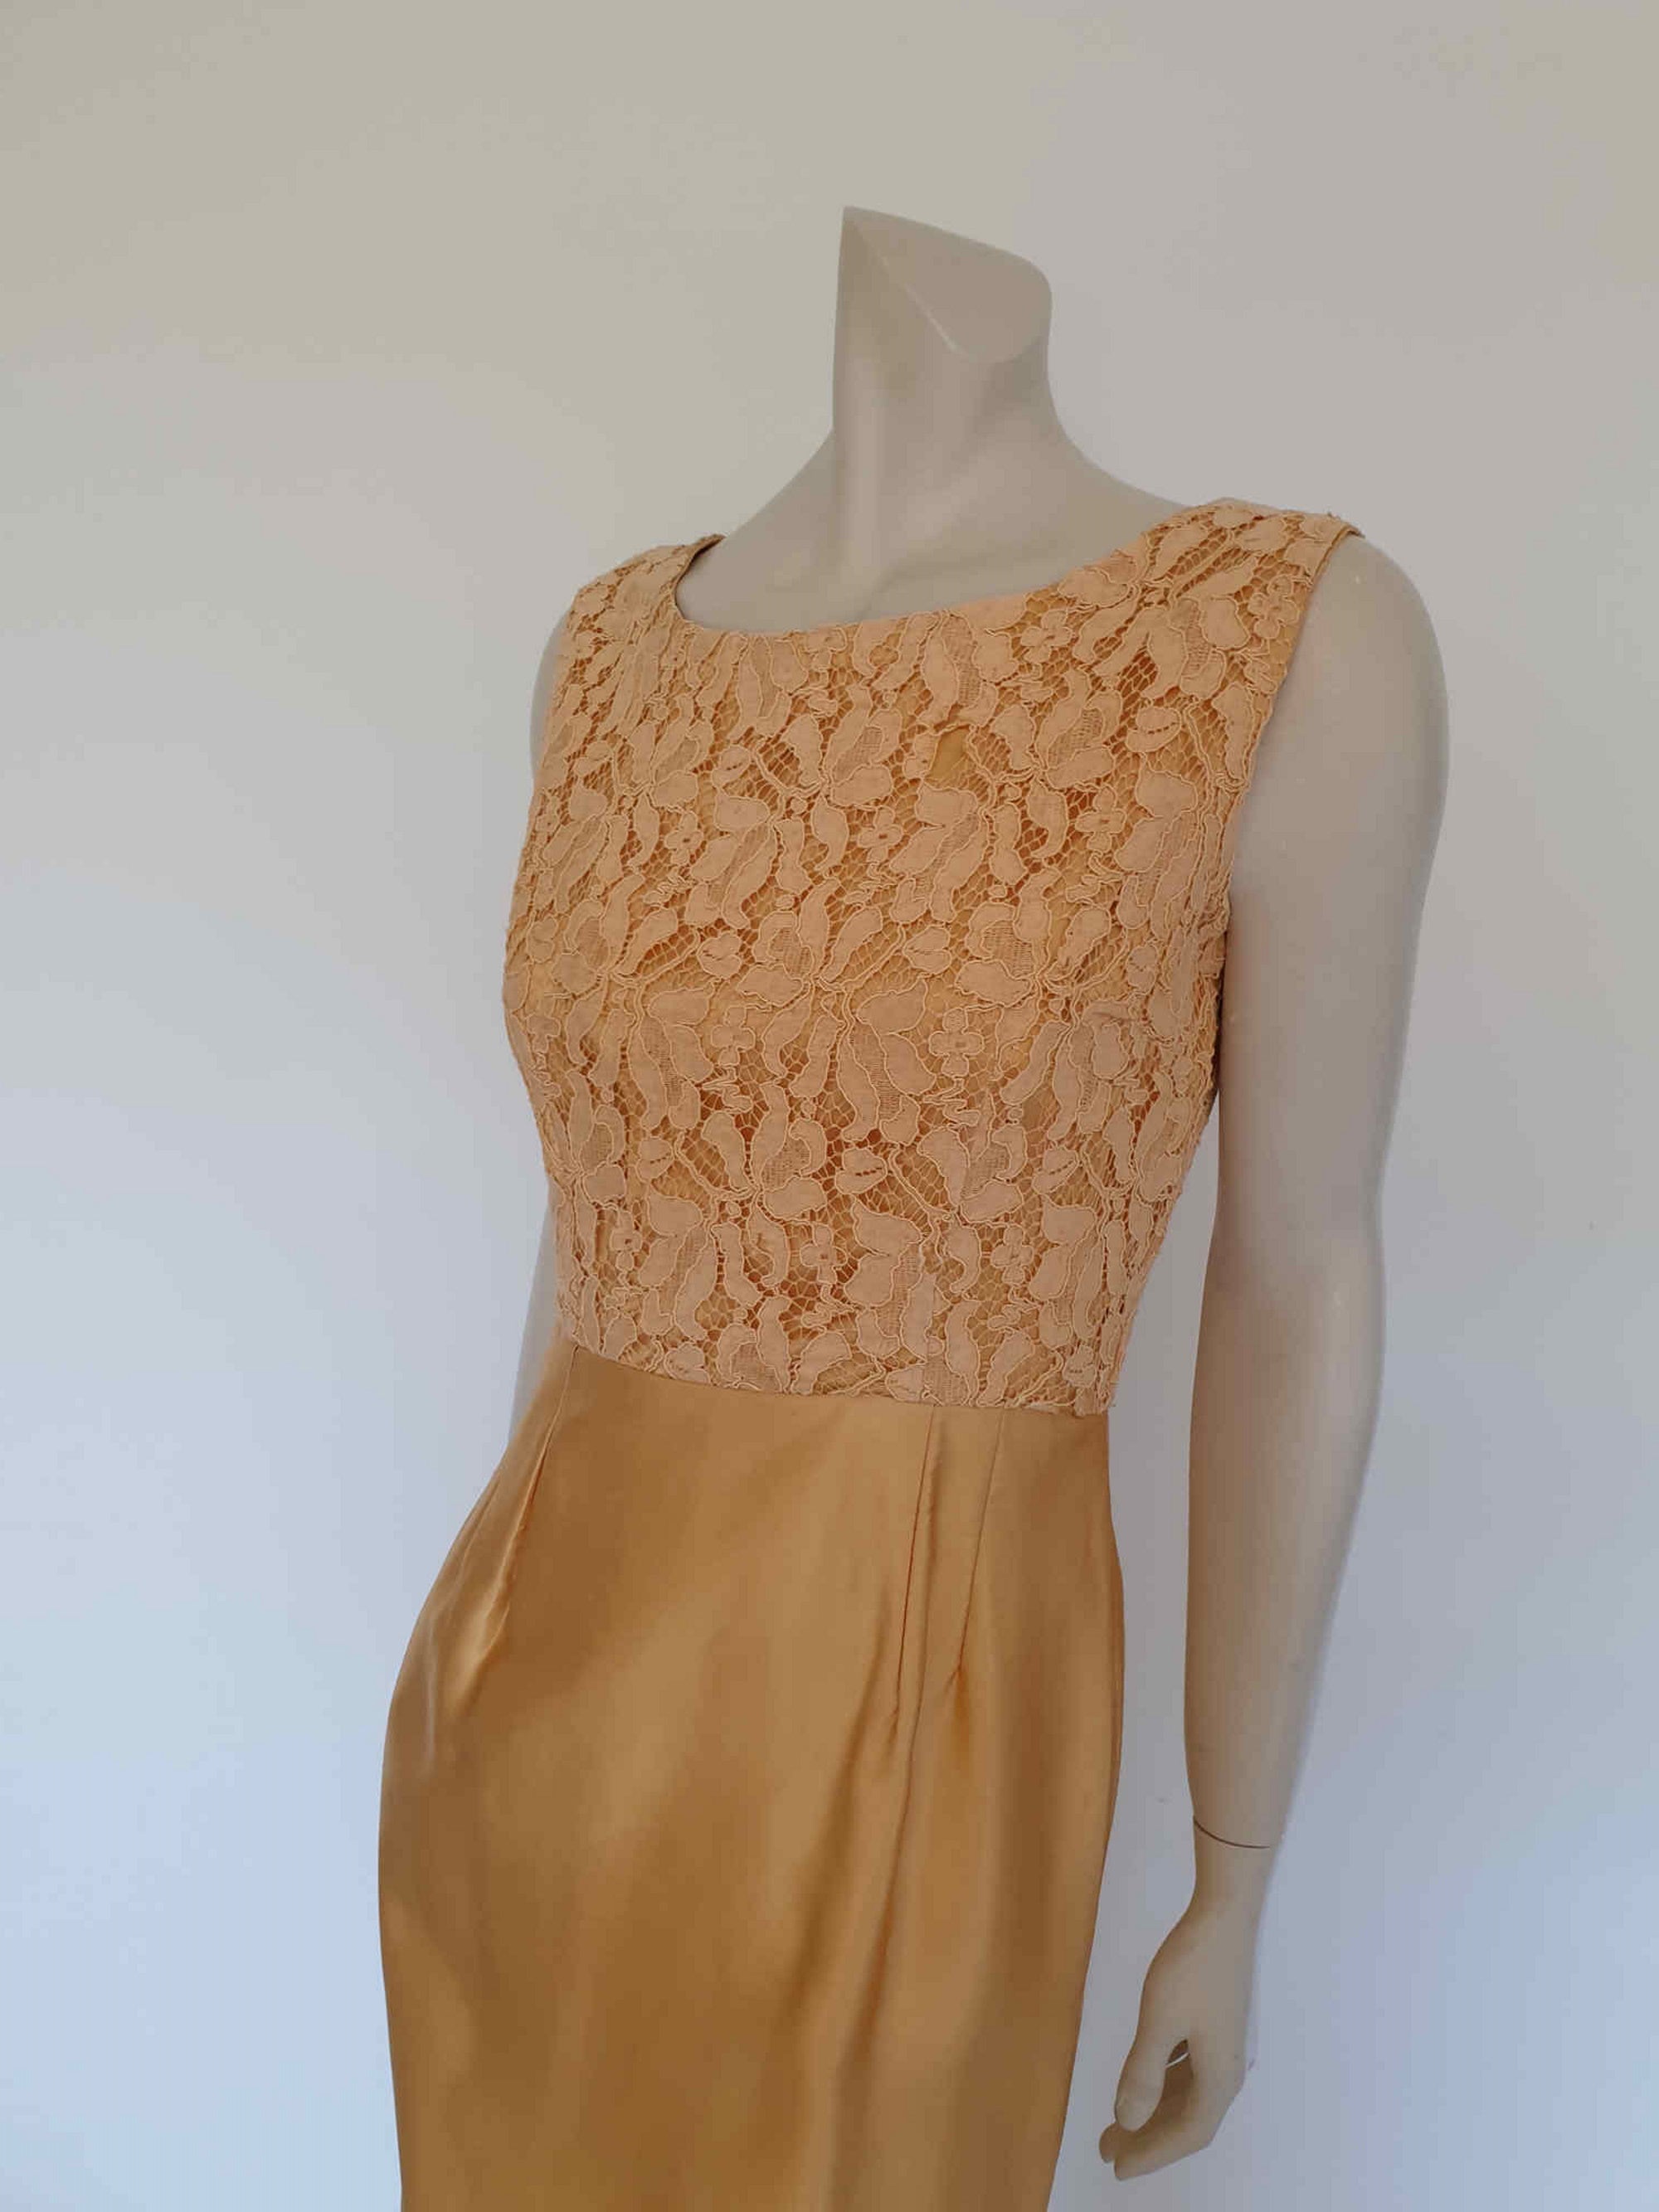 1960s gold satin and lace cocktail dress